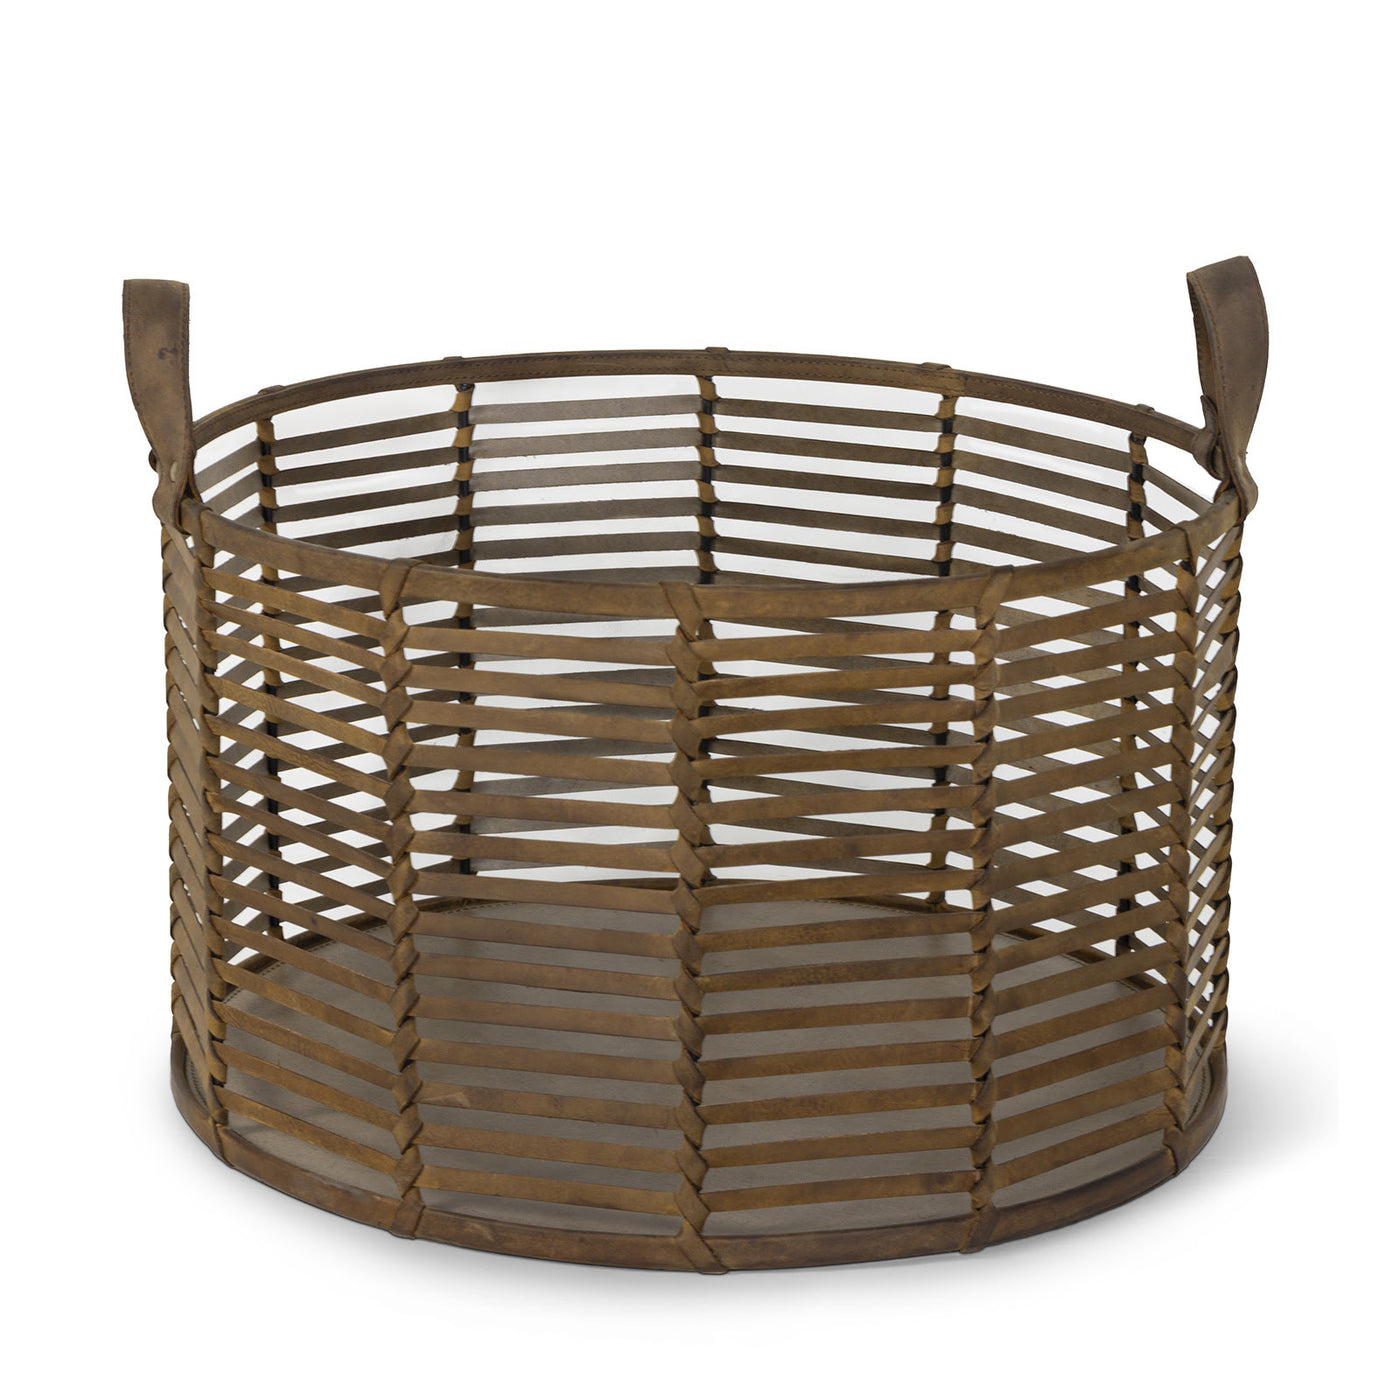 BASKET LEATHER WOVEN WITH HANDLES (Available in 2 Sizes)